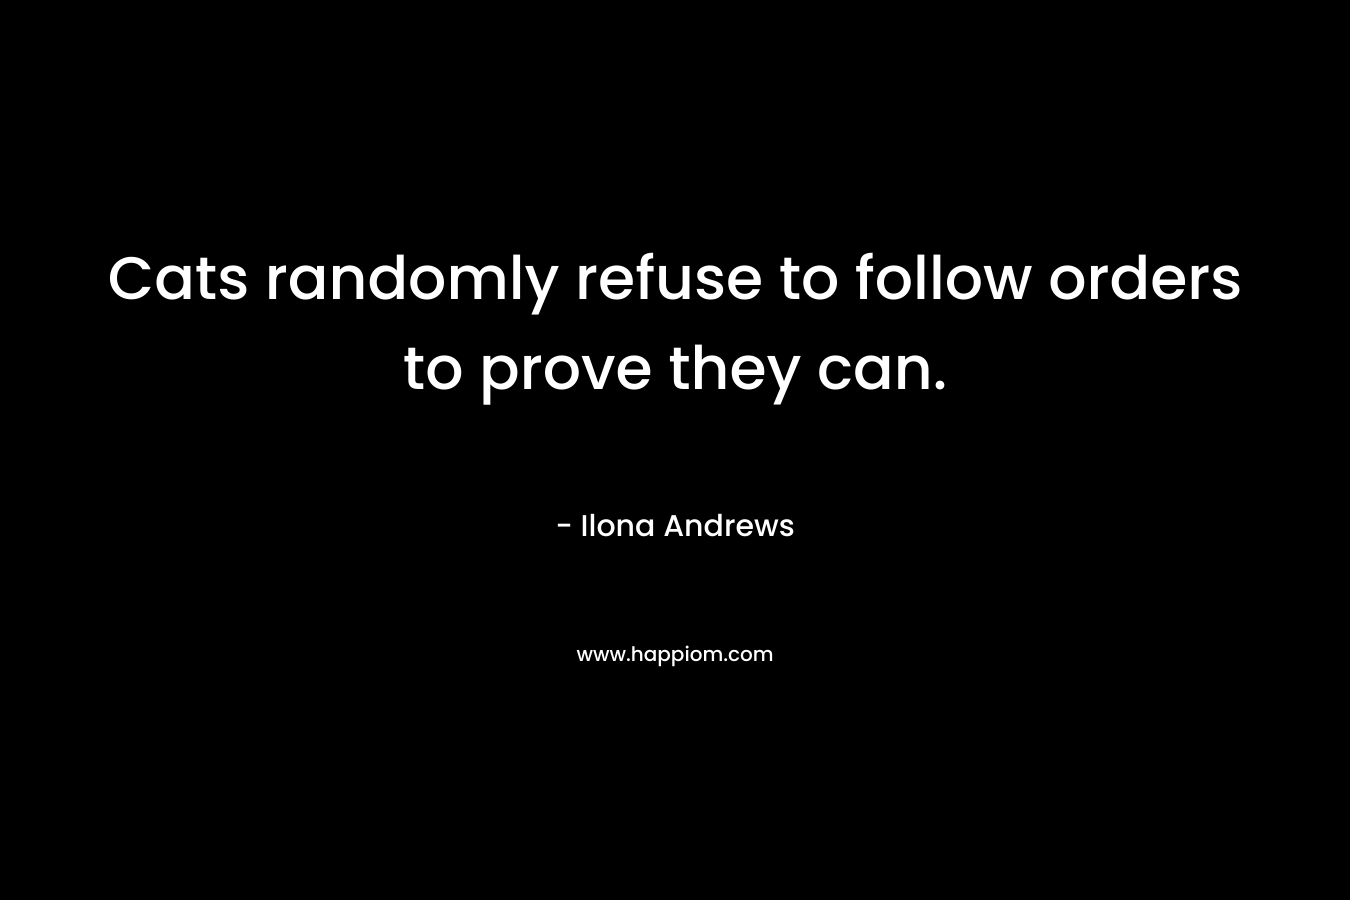 Cats randomly refuse to follow orders to prove they can. – Ilona Andrews